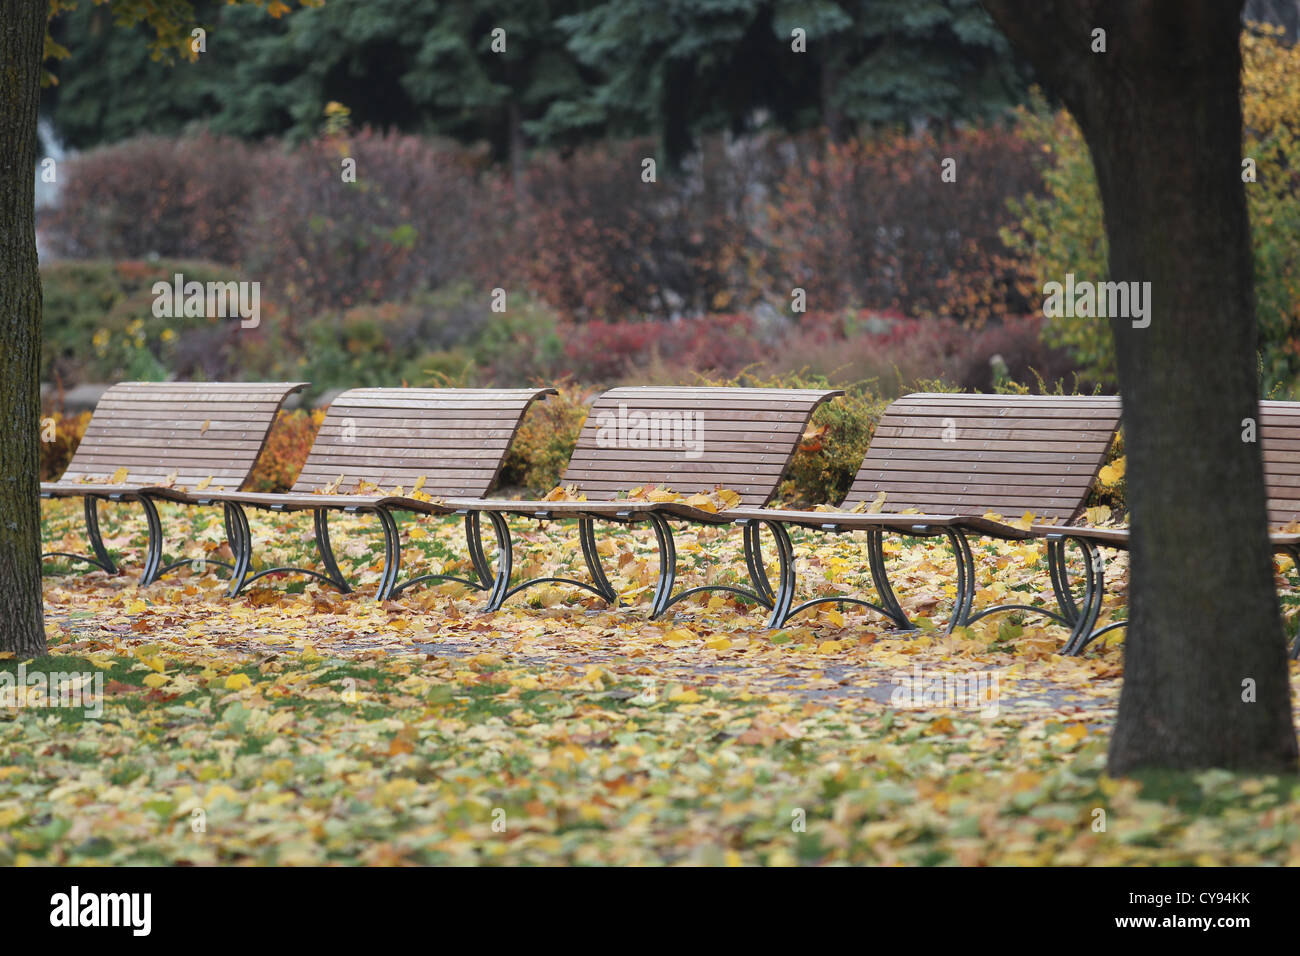 Row of park benches in a park Stock Photo